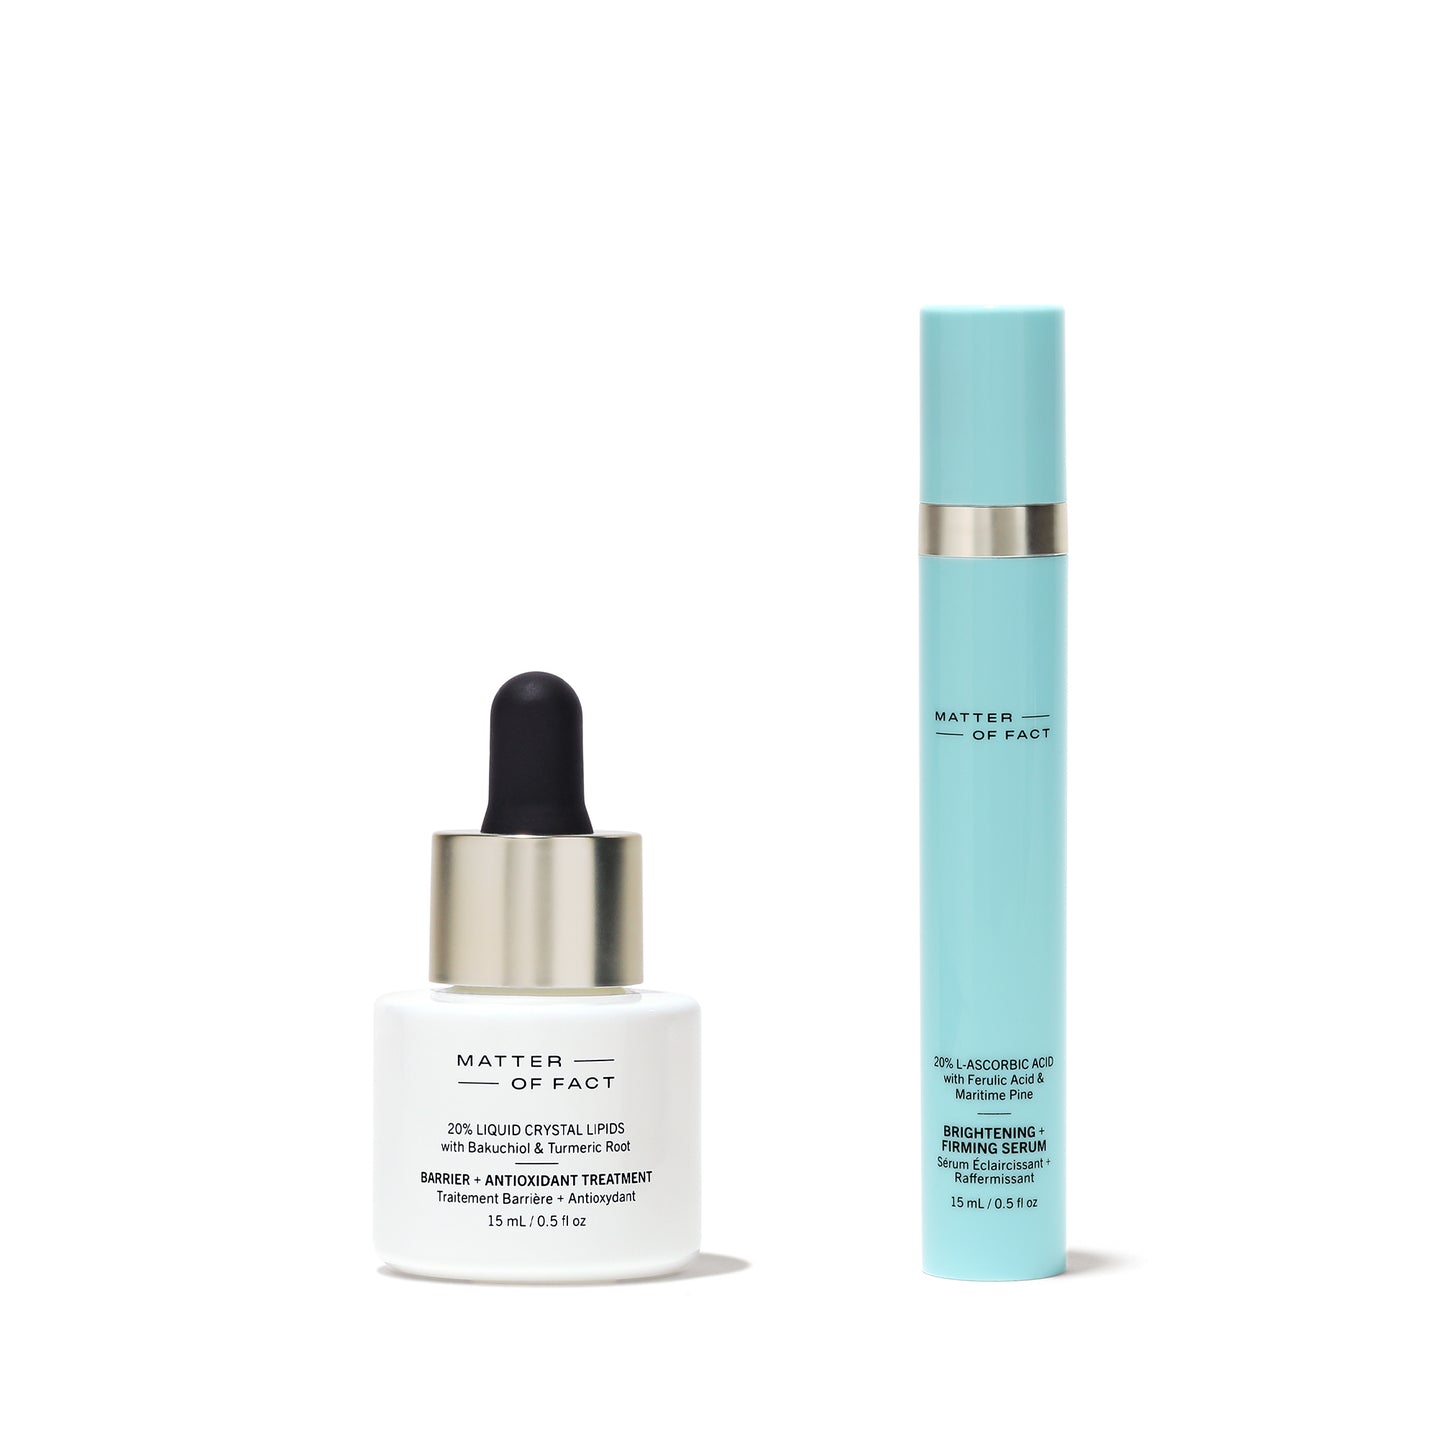 MATTER OF FACT Skincare BRIGHTENING + FIRMING SERUM travel size and BARRIER + ANTIOXIDANT TREATMENT travel size